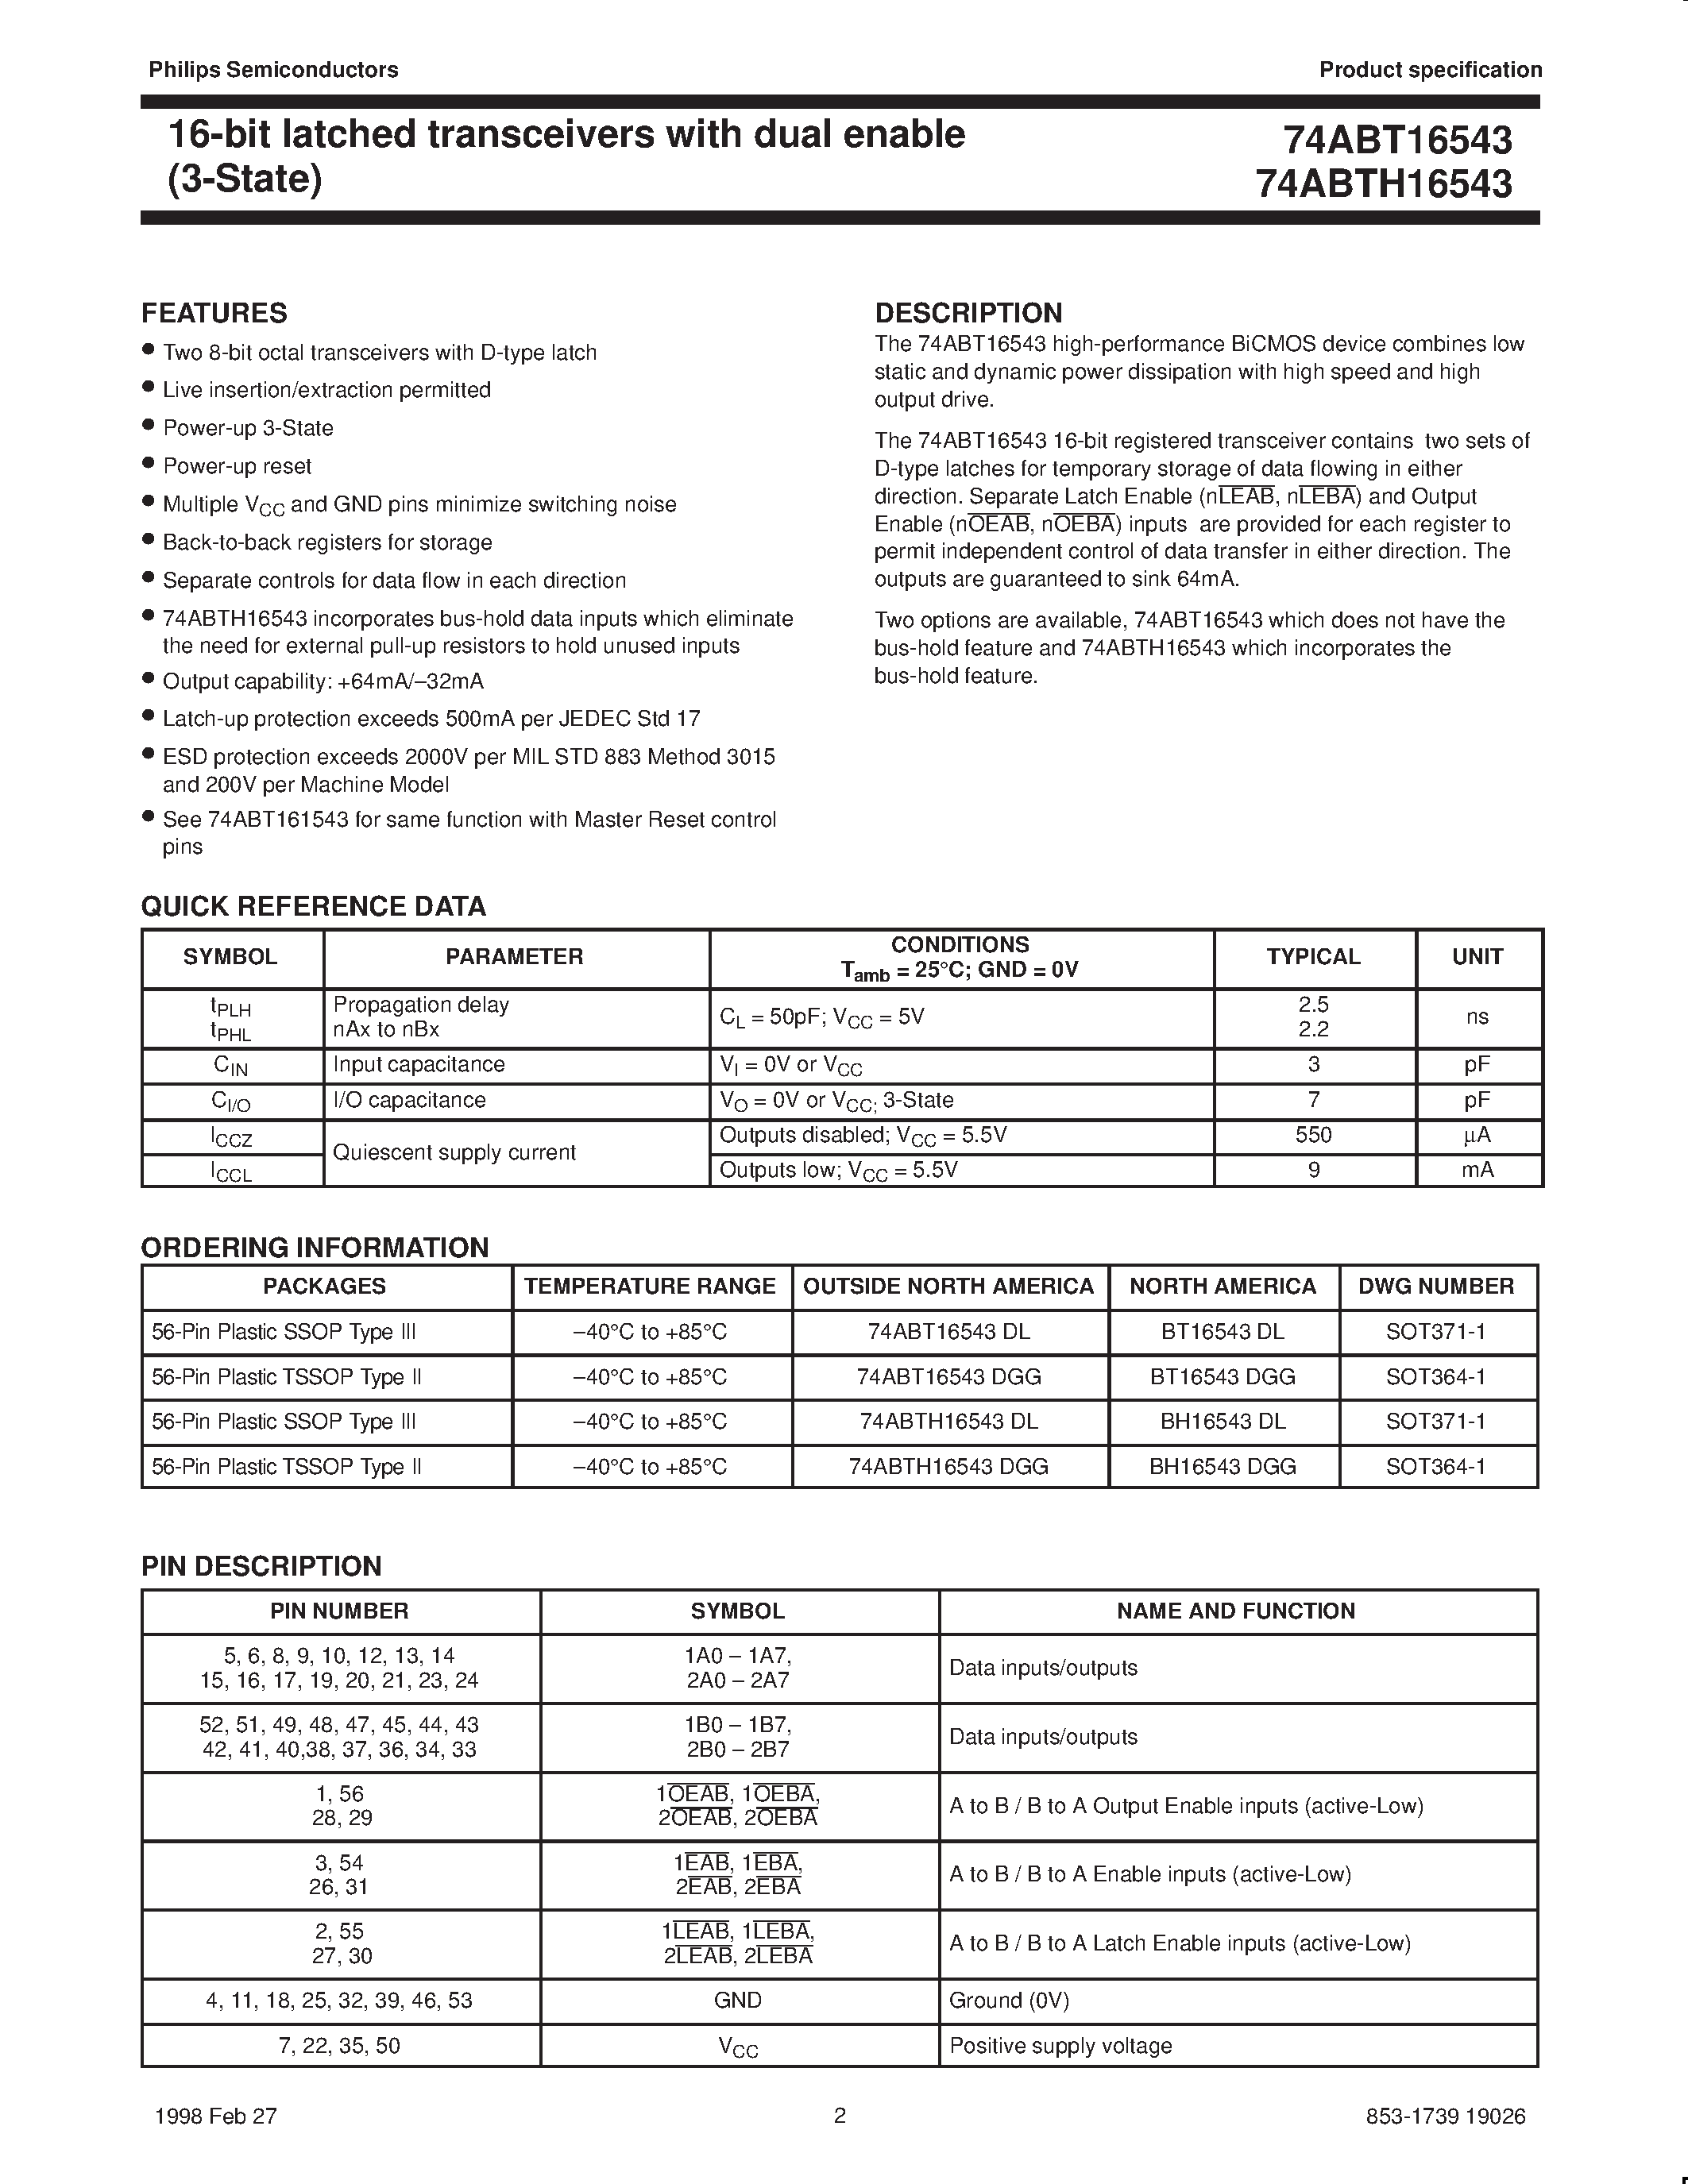 Datasheet 74ABTH16543 - 16-bit latched transceivers with dual enable 3-State page 2